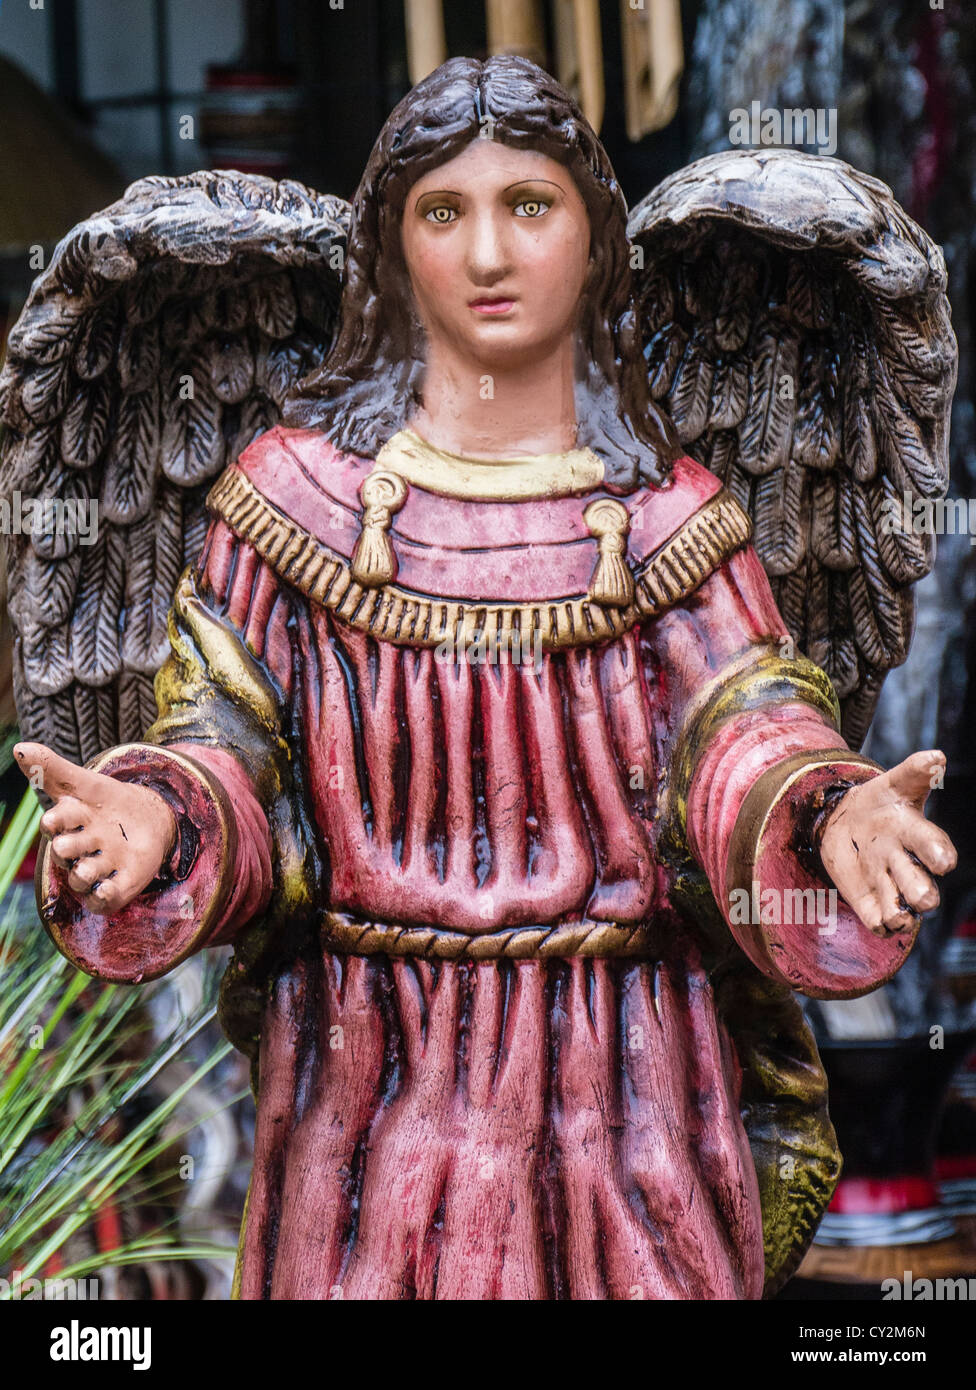 Kitsch lawn art for sale in the form of a angel figurine at a street market in Asunción Paraguay. Stock Photo